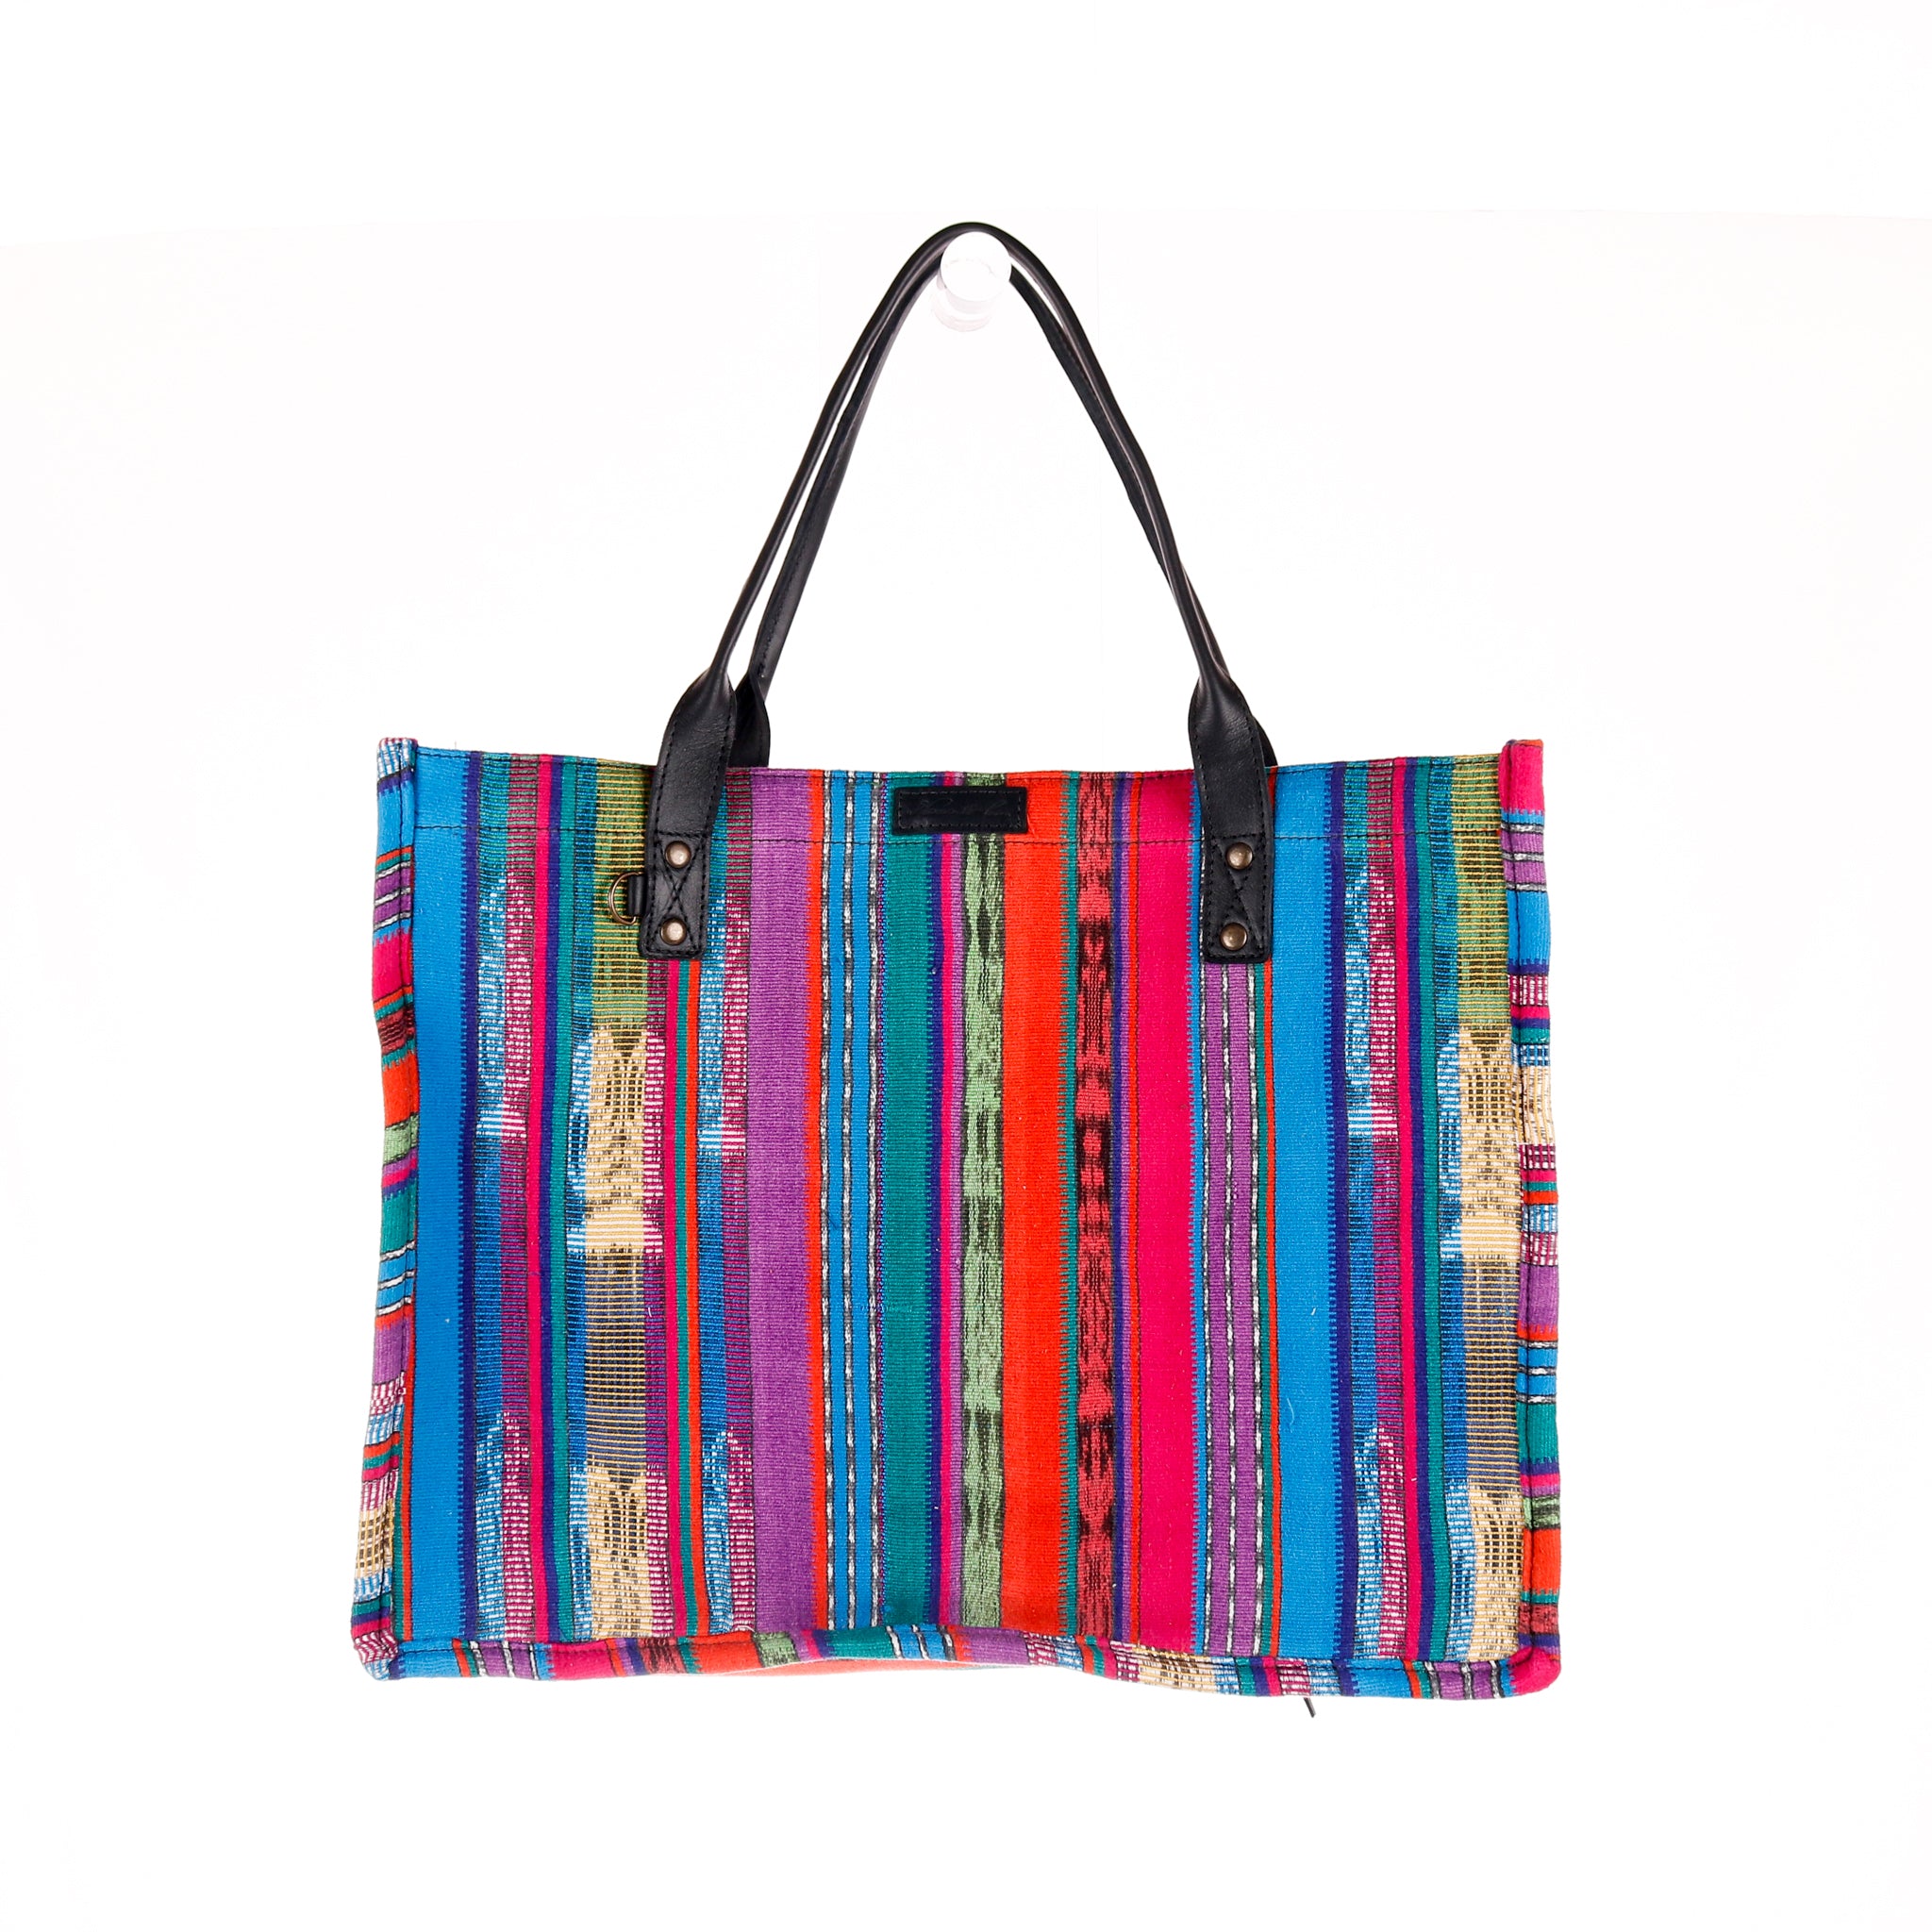 Creative Cats, Life's a Beach Tote Bag with Adjustable Straps